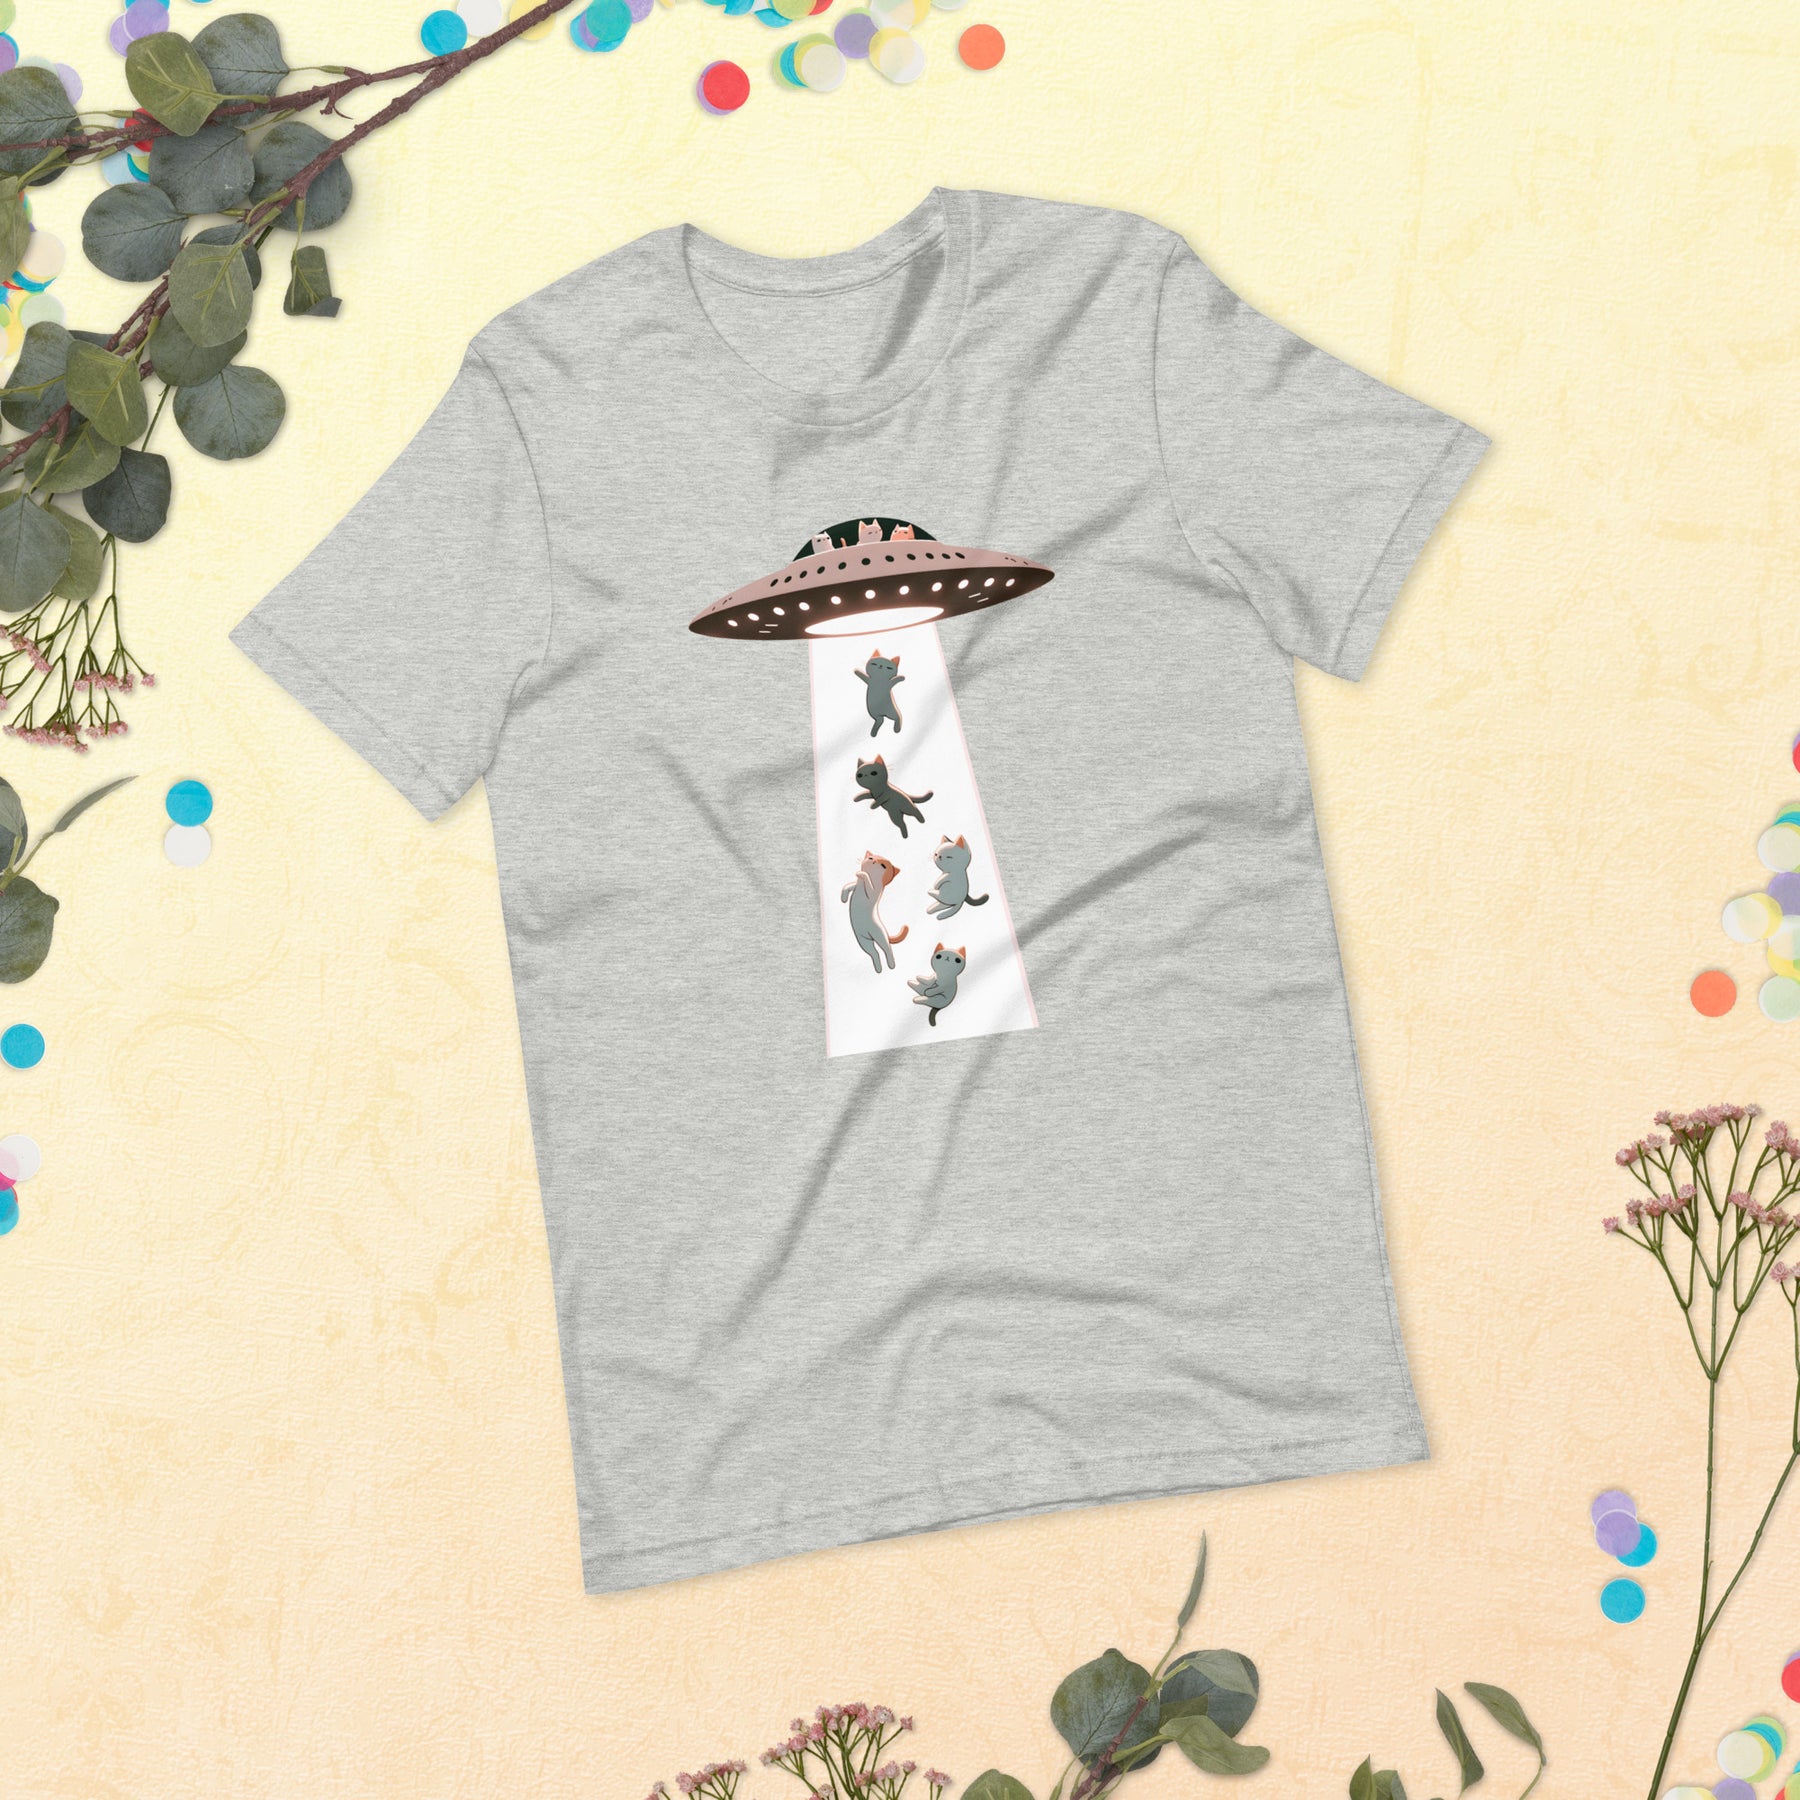 Funny UFO Cat Abduction Tee - Kawaii Cats Alien Spaceship Design for Science and Cat Enthusiasts